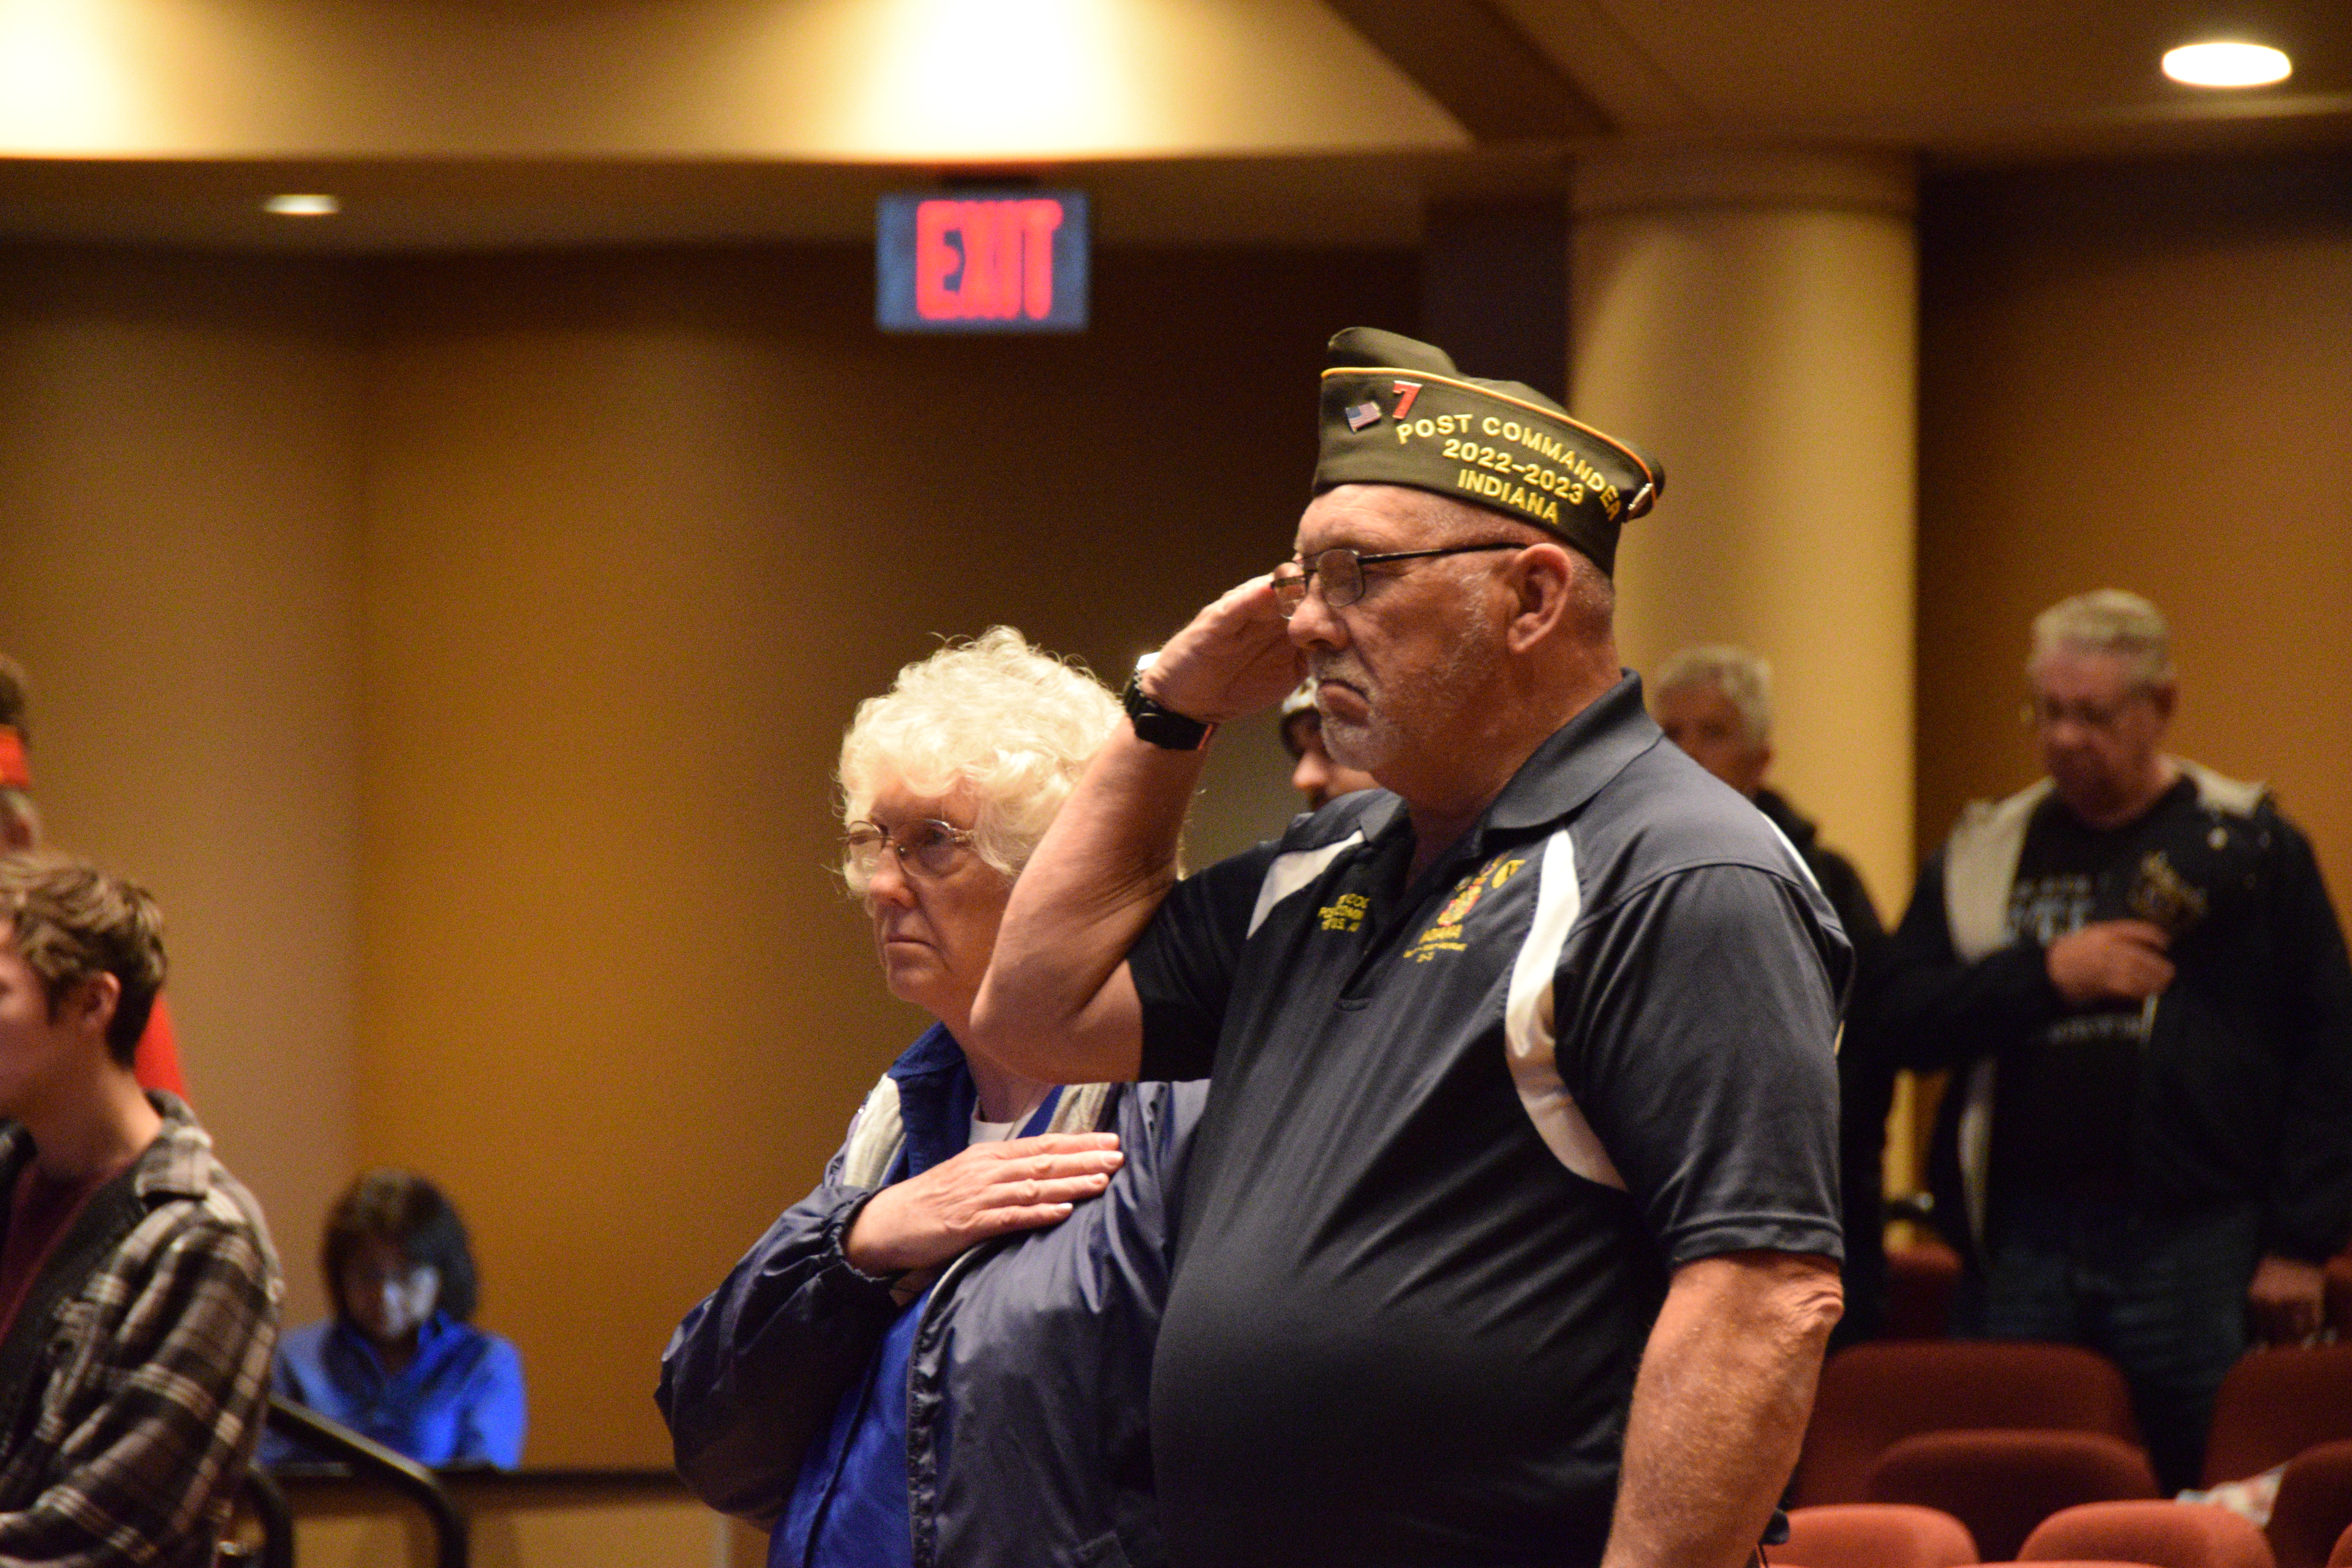 A male veteran salutes with a woman standing next to him.